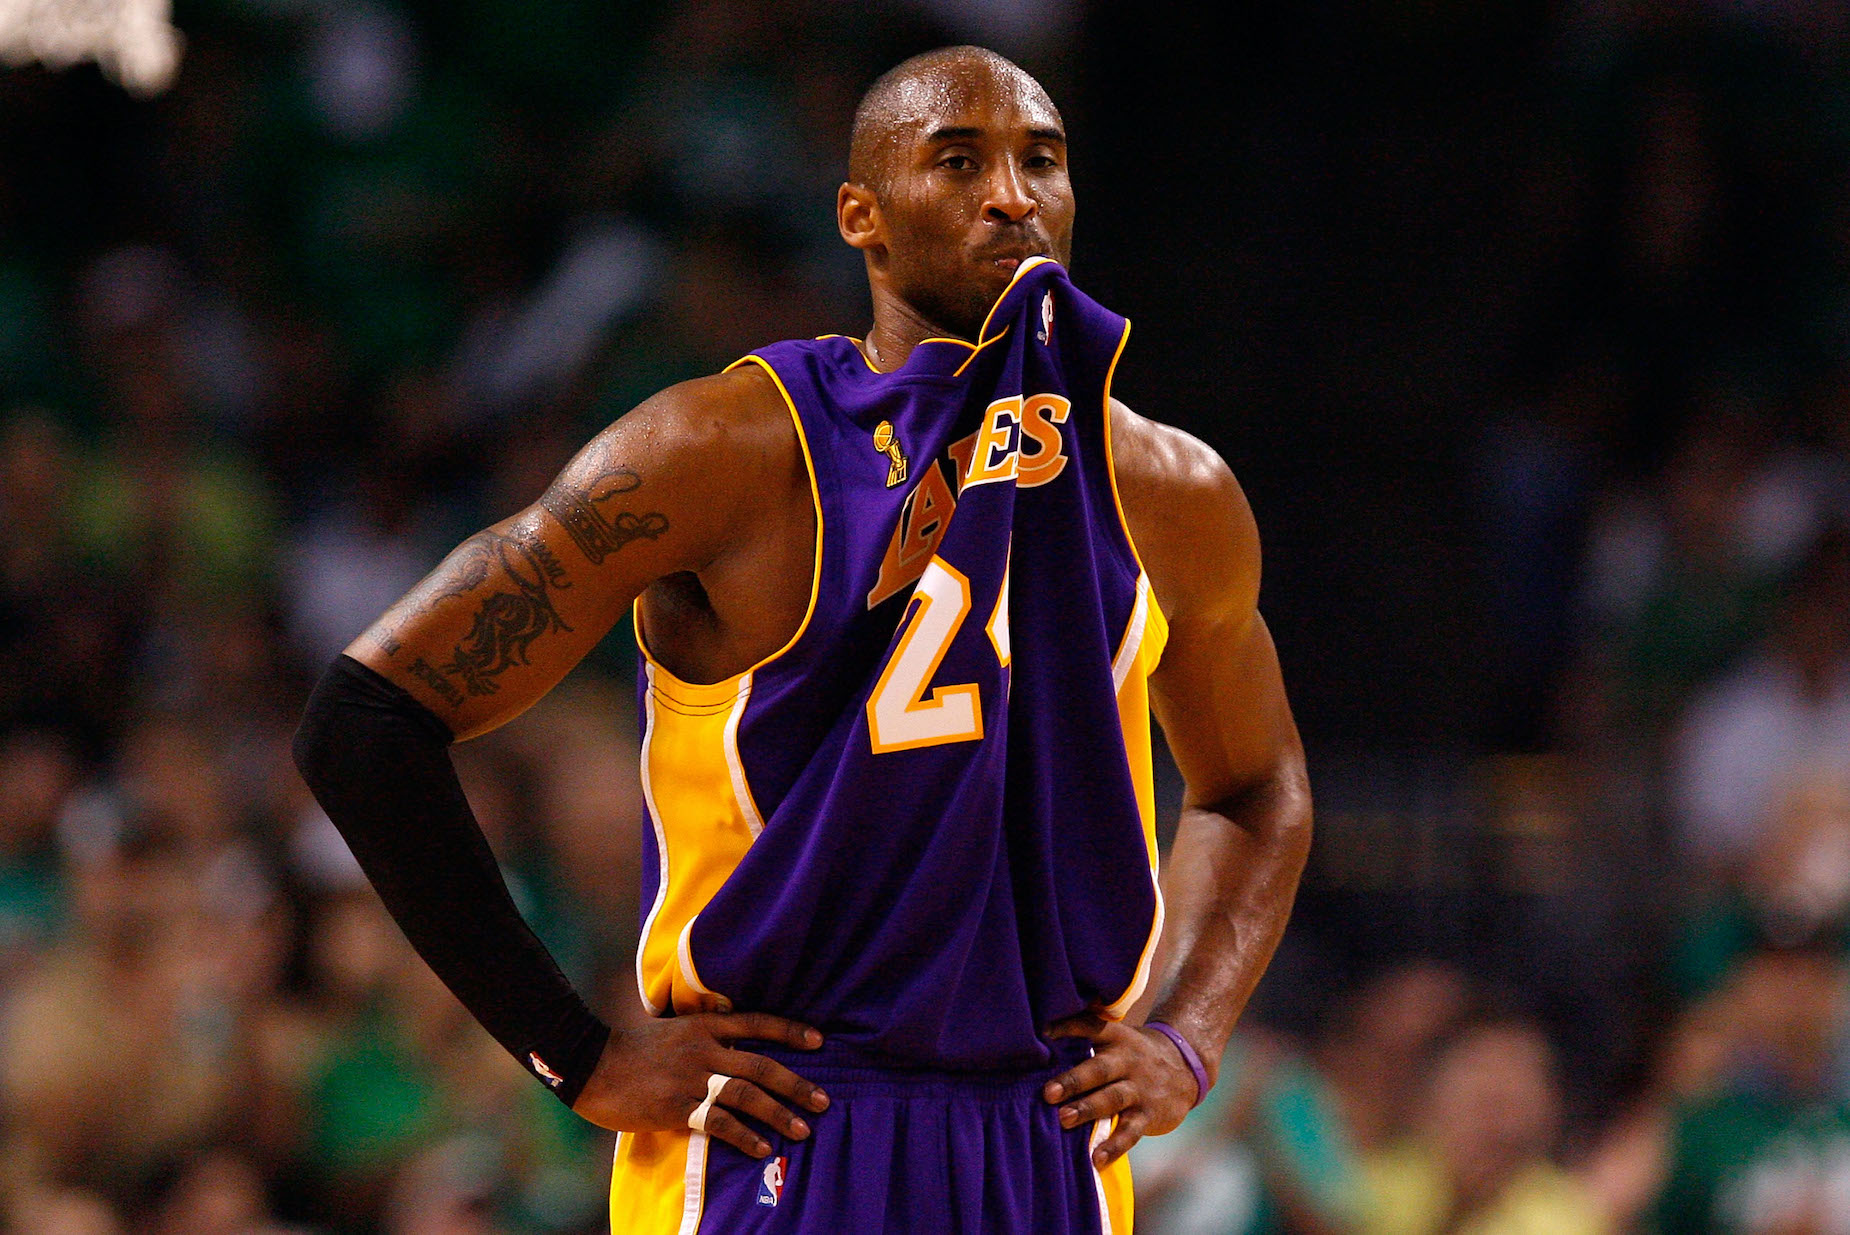 Kobe Bryant chews his jersey while facing defeat in the 2008 NBA Finals.